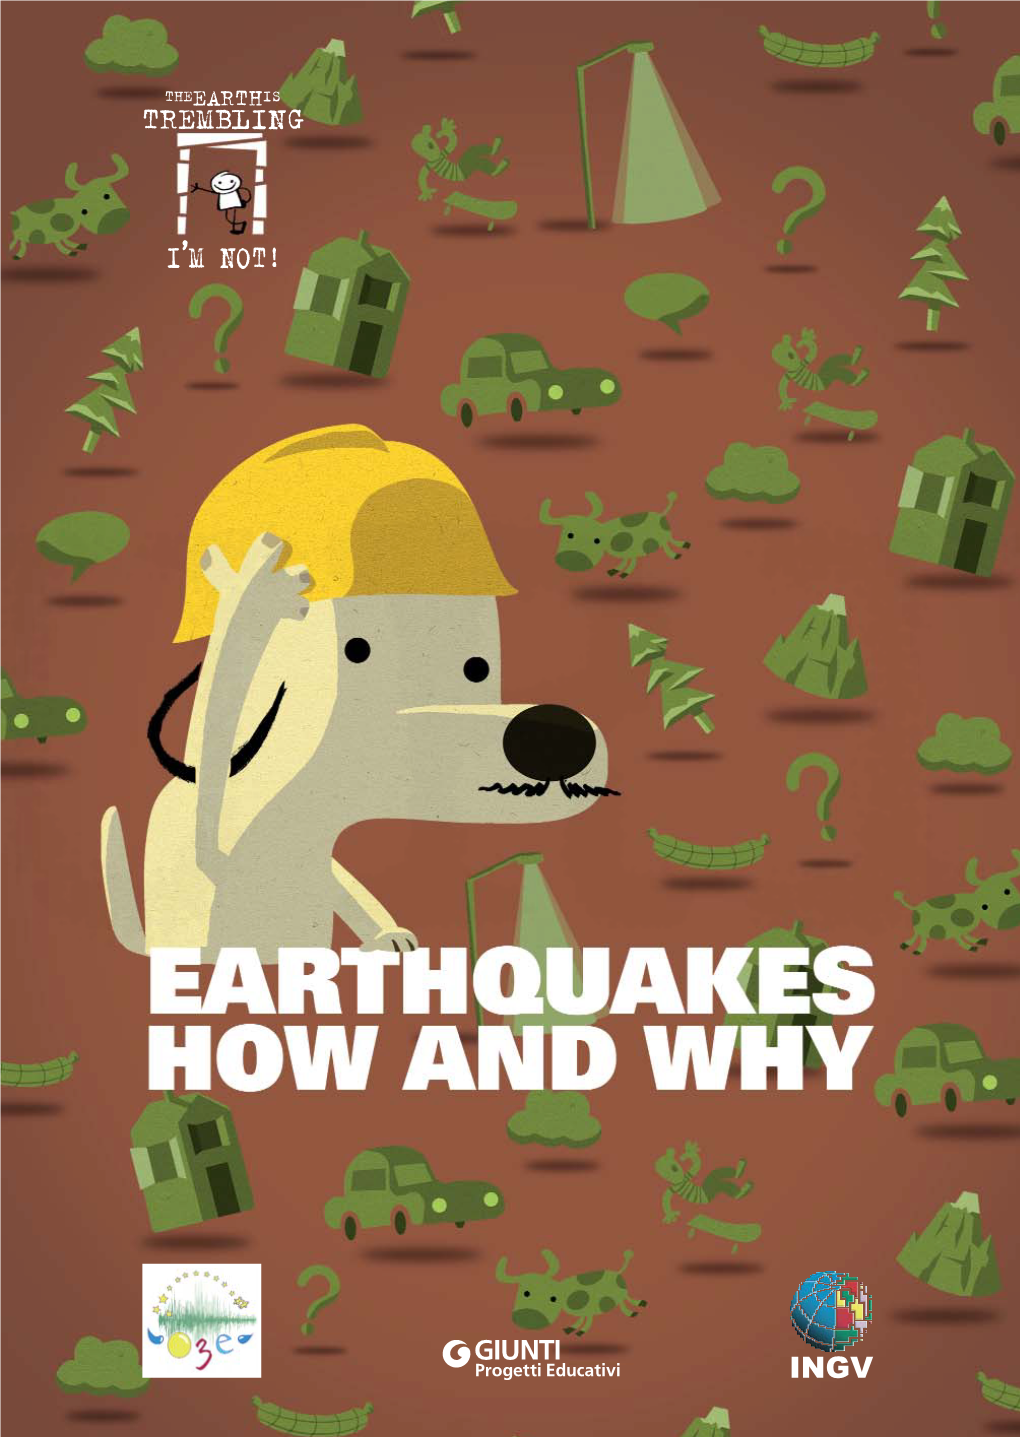 WHAT Is SEISMIC RISK? 52 What HAPPENS During an EARTHQUAKE?